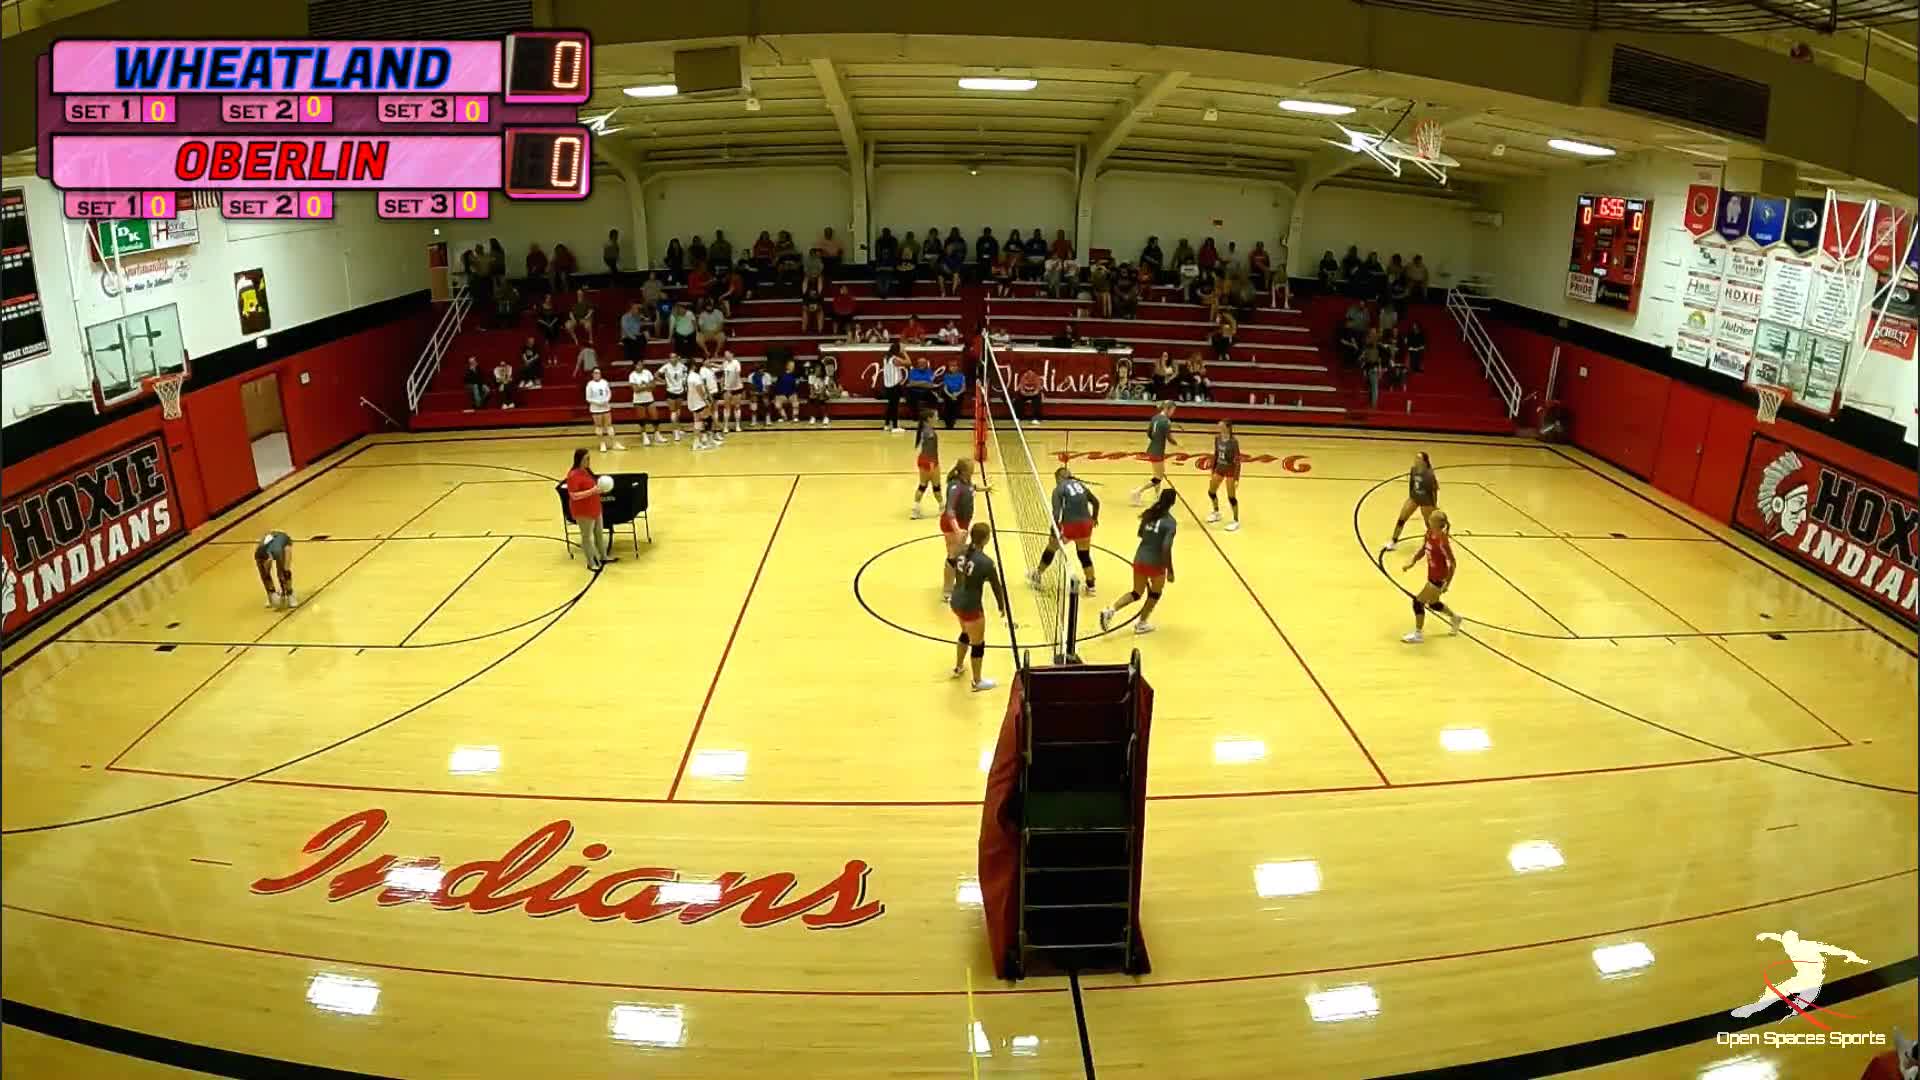 Wheatland Grinnell vs Oberlin Volleyball OpenSpacesSports2